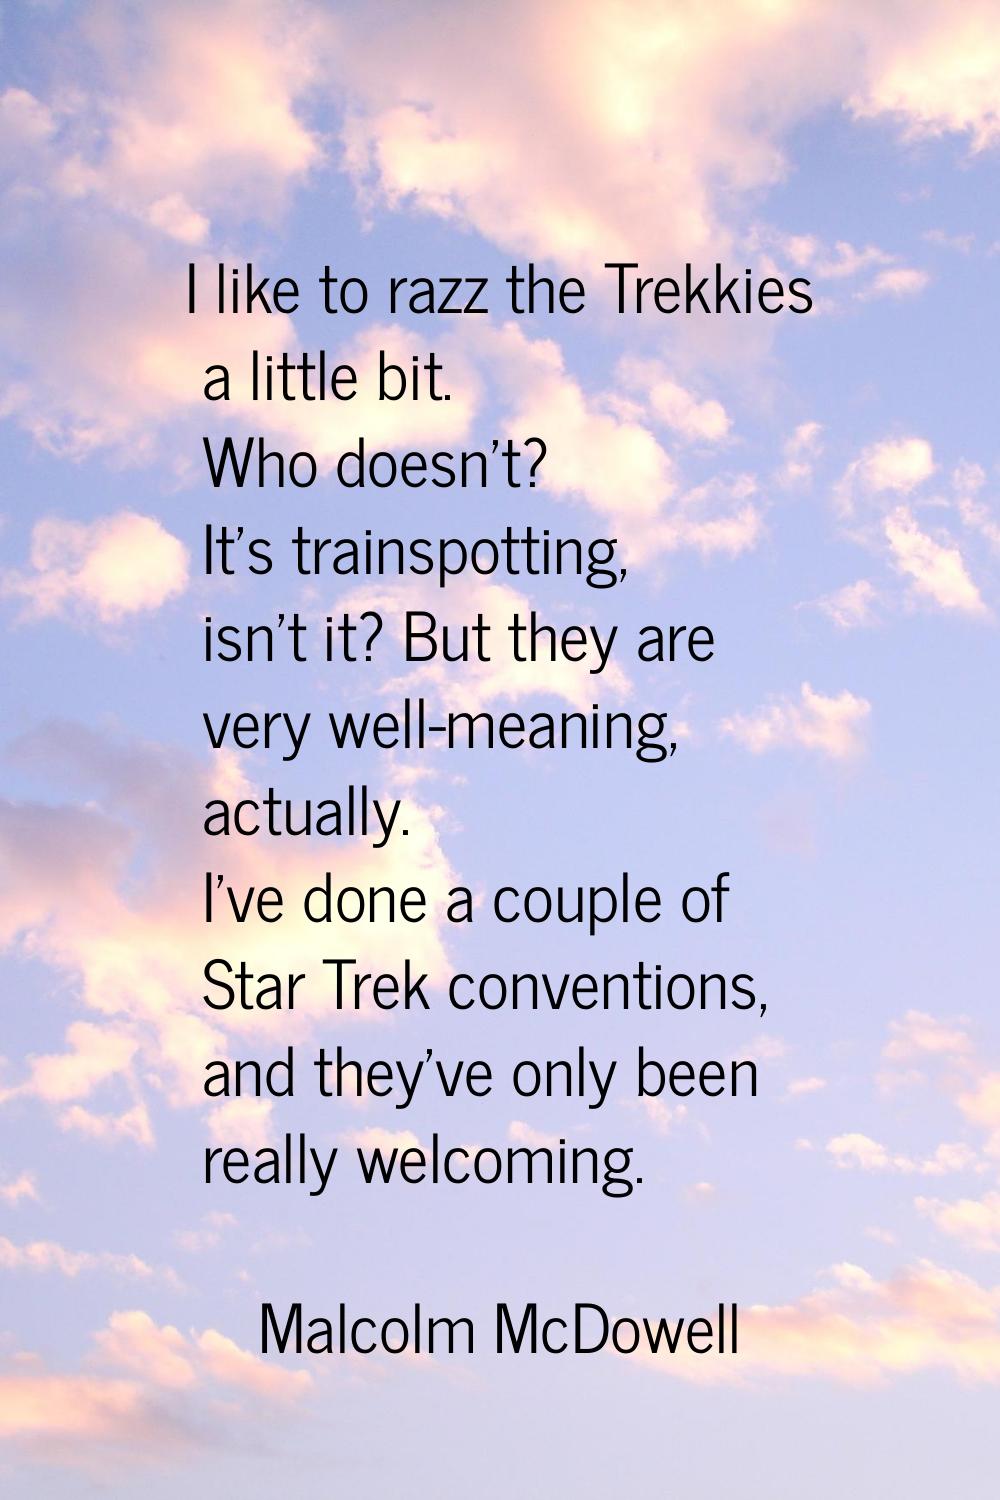 I like to razz the Trekkies a little bit. Who doesn't? It's trainspotting, isn't it? But they are v